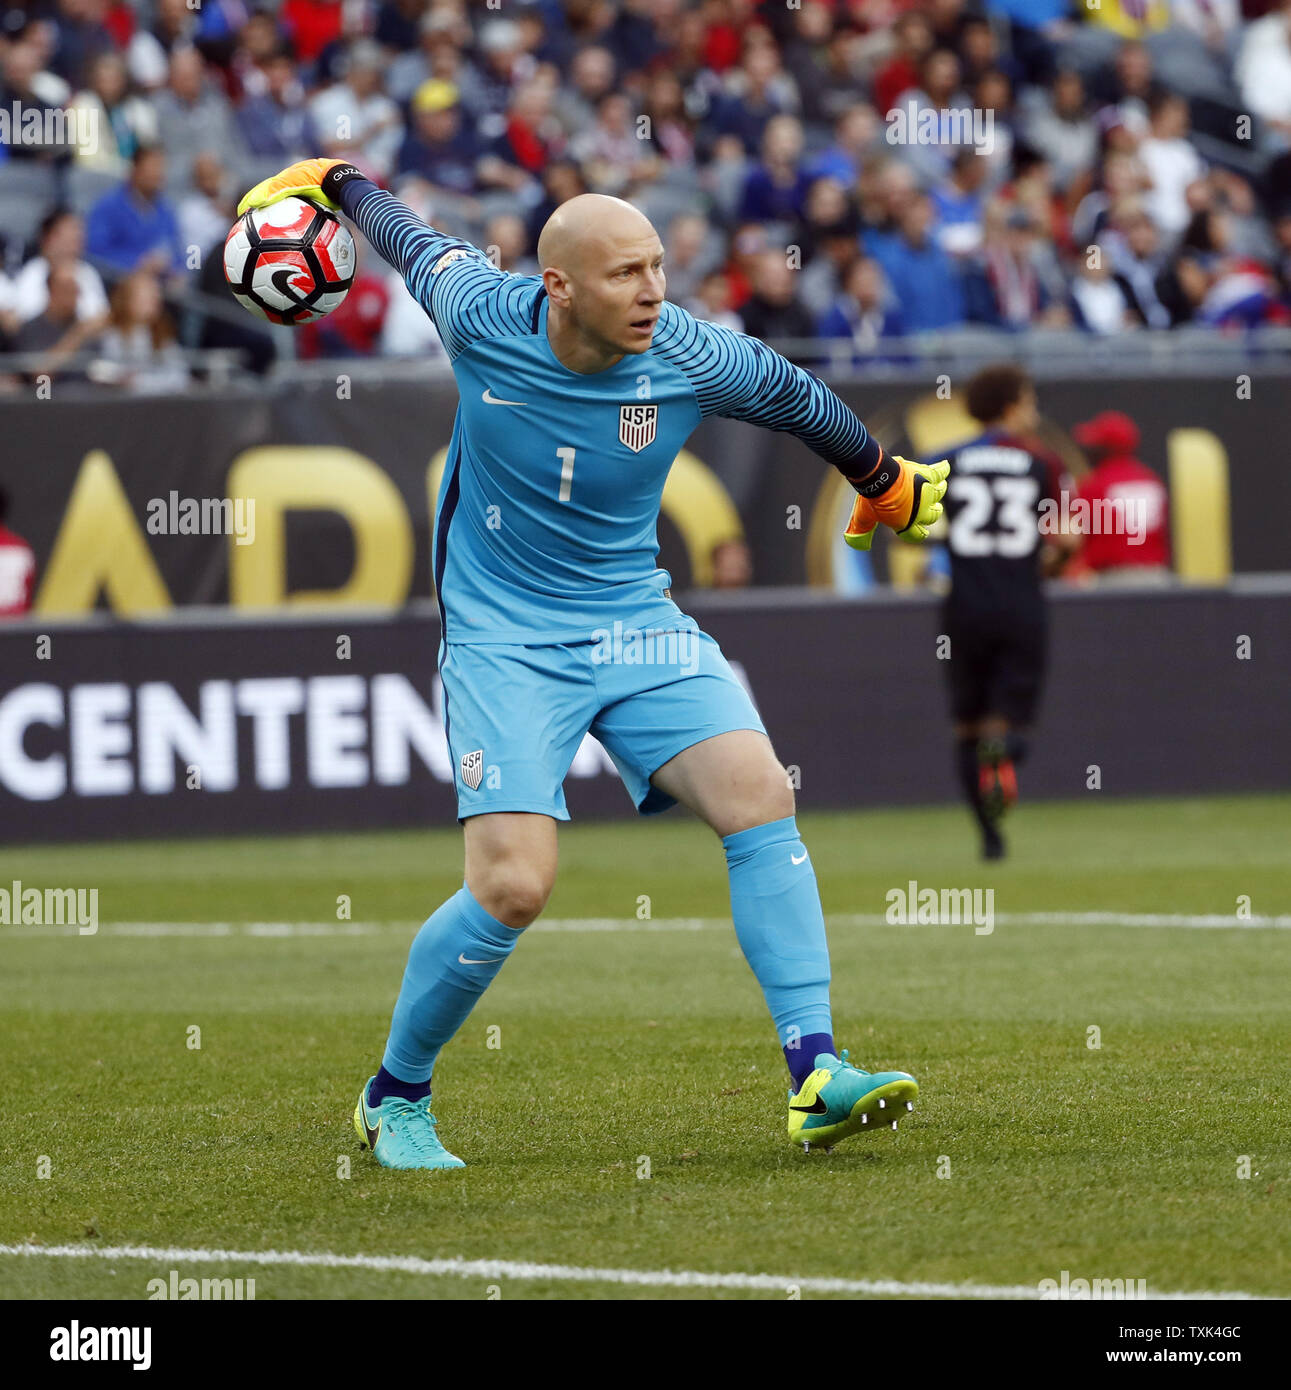 United States goalkeeper Brad Guzan (1) throws the ball during the first half of a 2016 Copa America Centenario Group A match against Costa Rica at Soldier Field in Chicago on June 7, 2016. The United States defeated Costa Rica 4-0.     Photo by Brian Kersey/UPI Stock Photo